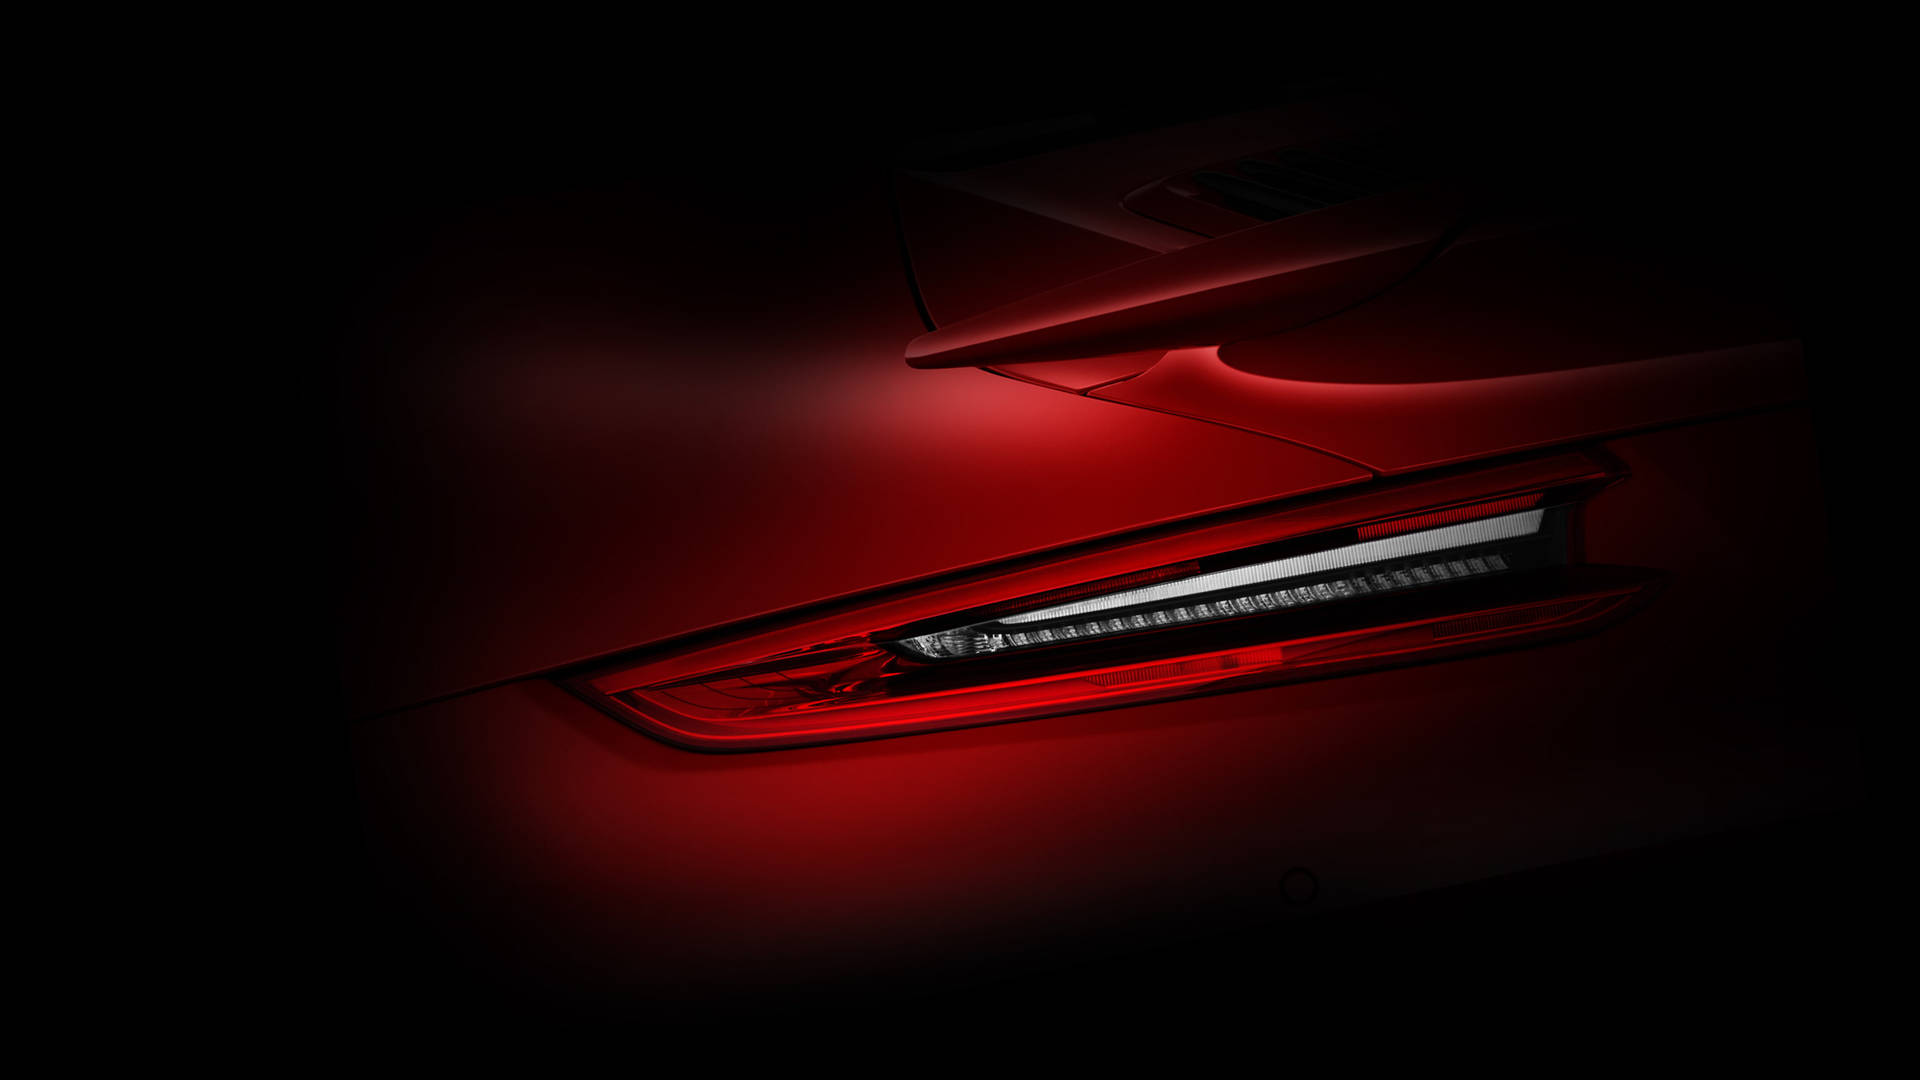 Huawei Mate Rs Porsche Red Background